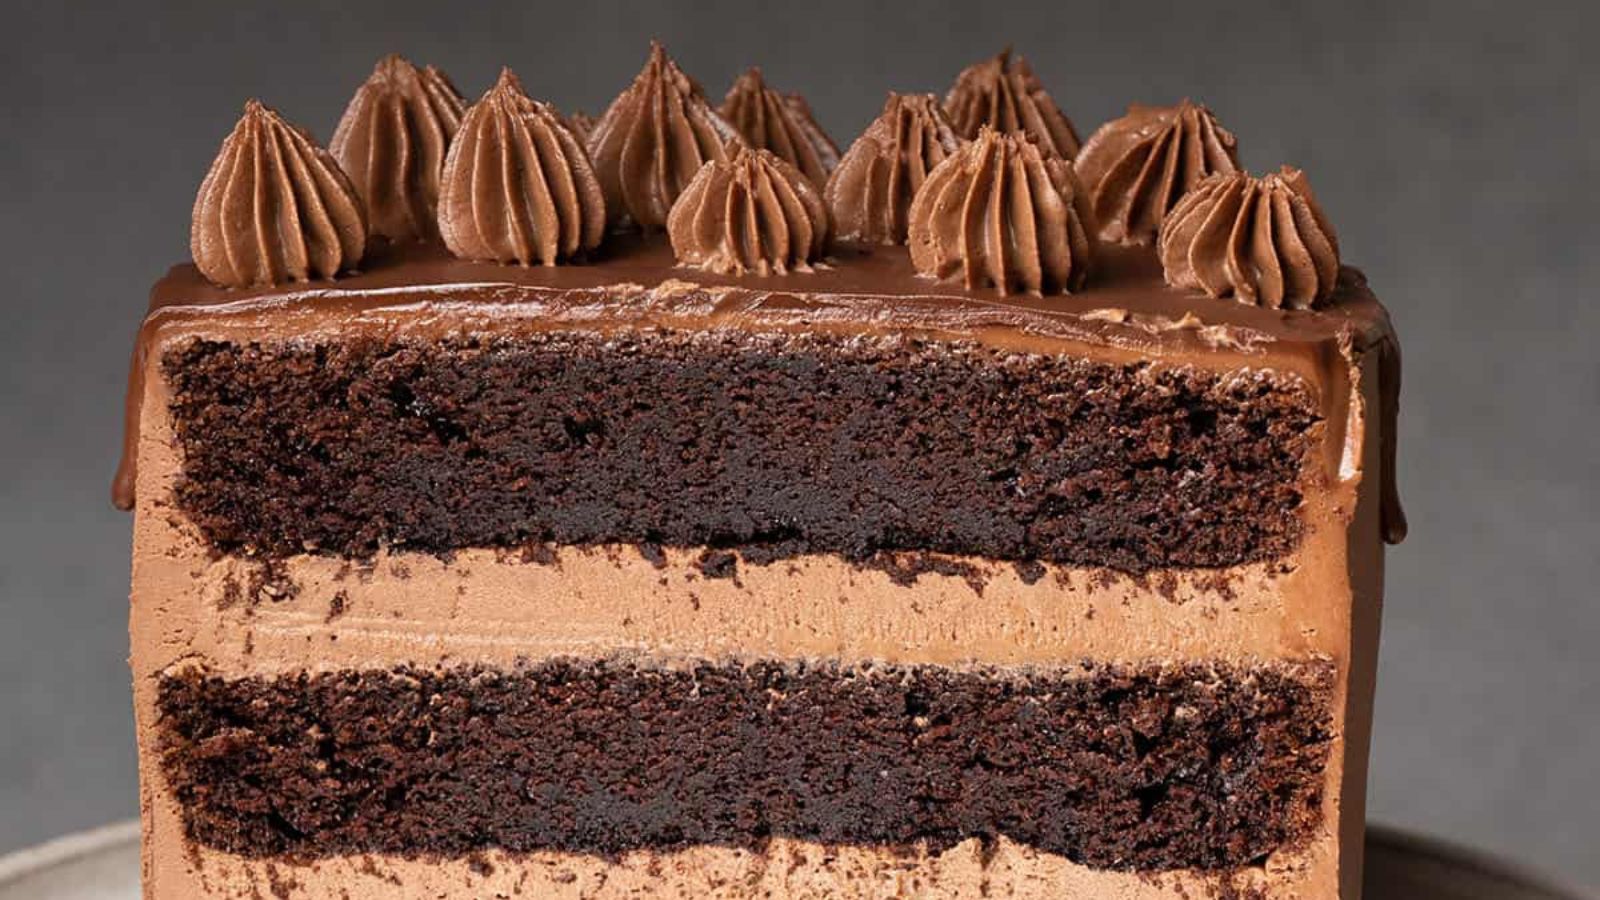 <p>Chocolate lovers will drool over this triple chocolate cake recipe, made with mouthwatering chocolate sponge cake, creamy chocolate whipped ganache frosting and a decadent chocolate ganache drip. Perfect for birthdays, holidays, and after-dinner desserts, this easy-to-make homemade three-layer cake will quickly become a favorite for anyone who tries it!</p><p><strong>Recipe: <a href="https://www.spatuladesserts.com/triple-chocolate-cake/">triple chocolate cake</a></strong></p>